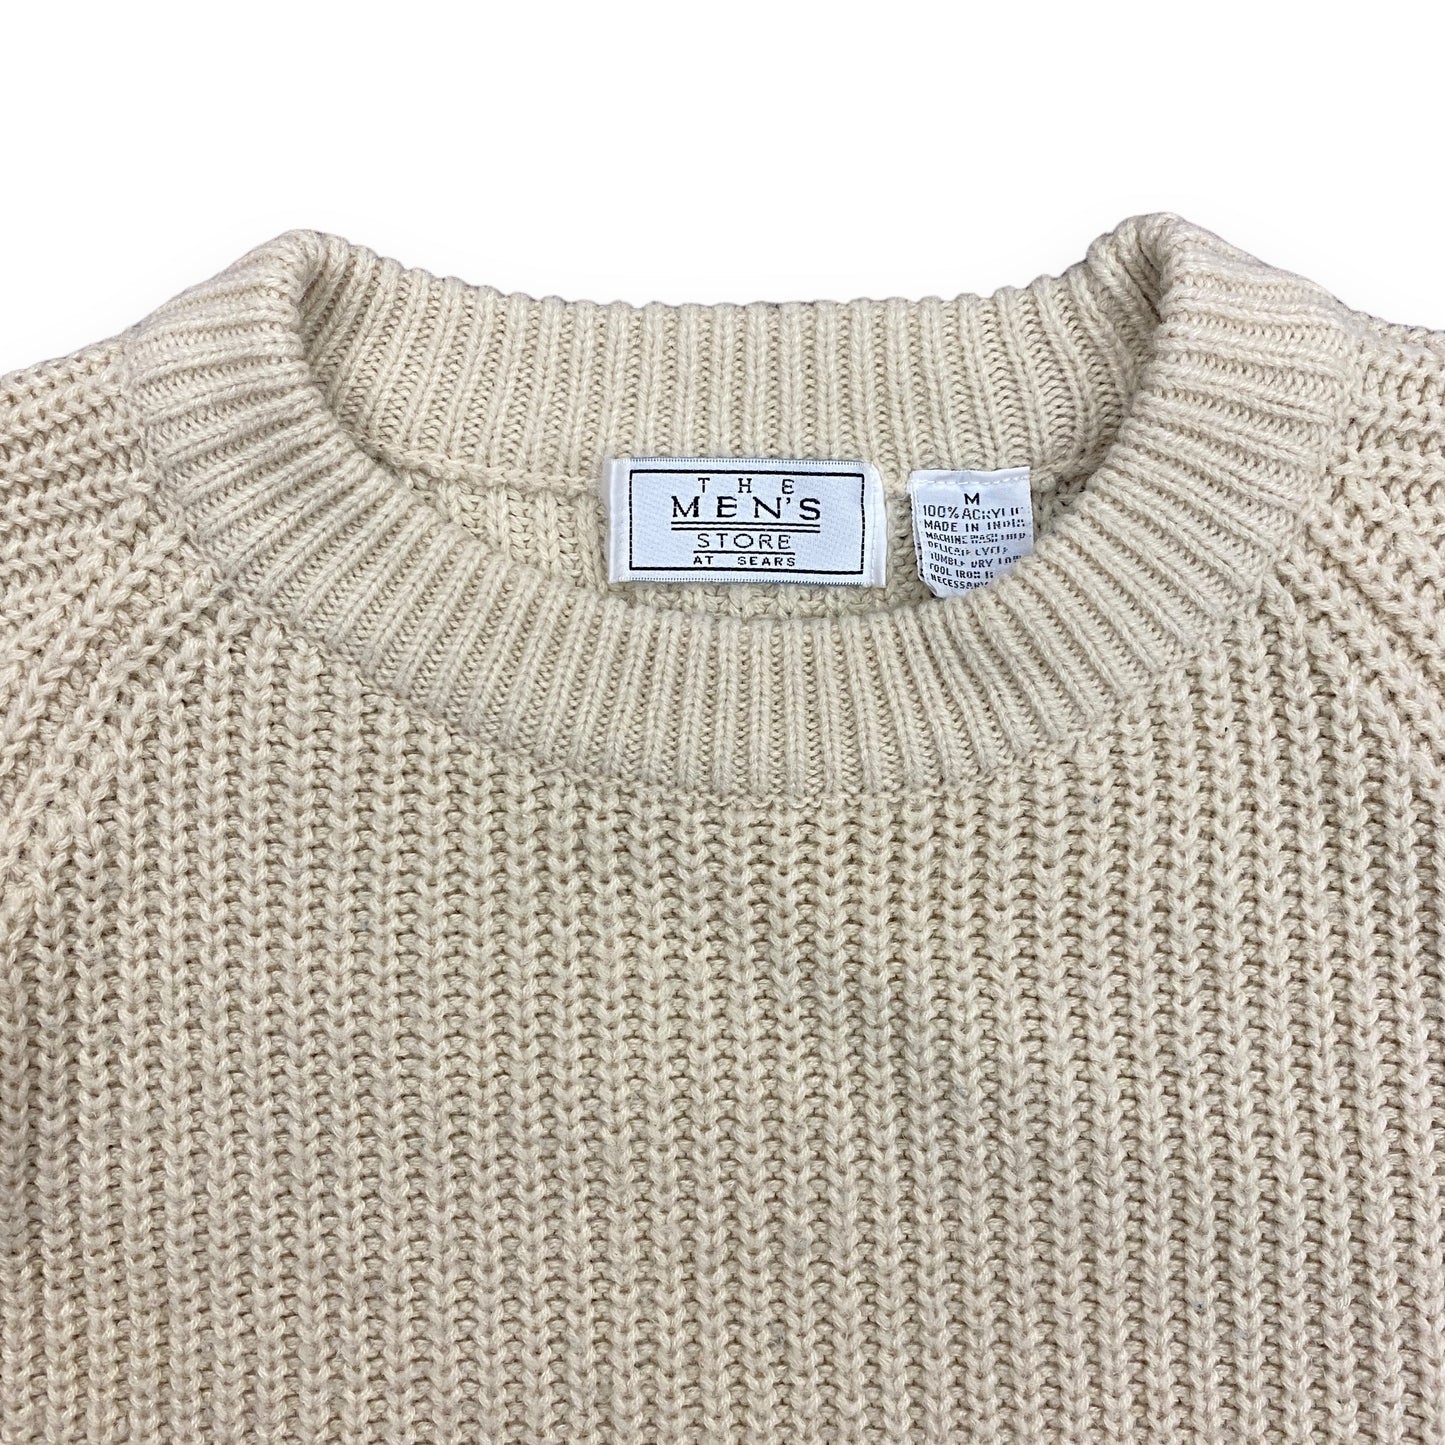 90s The Men's Store at Sears Cream Knit Sweater - Size Medium